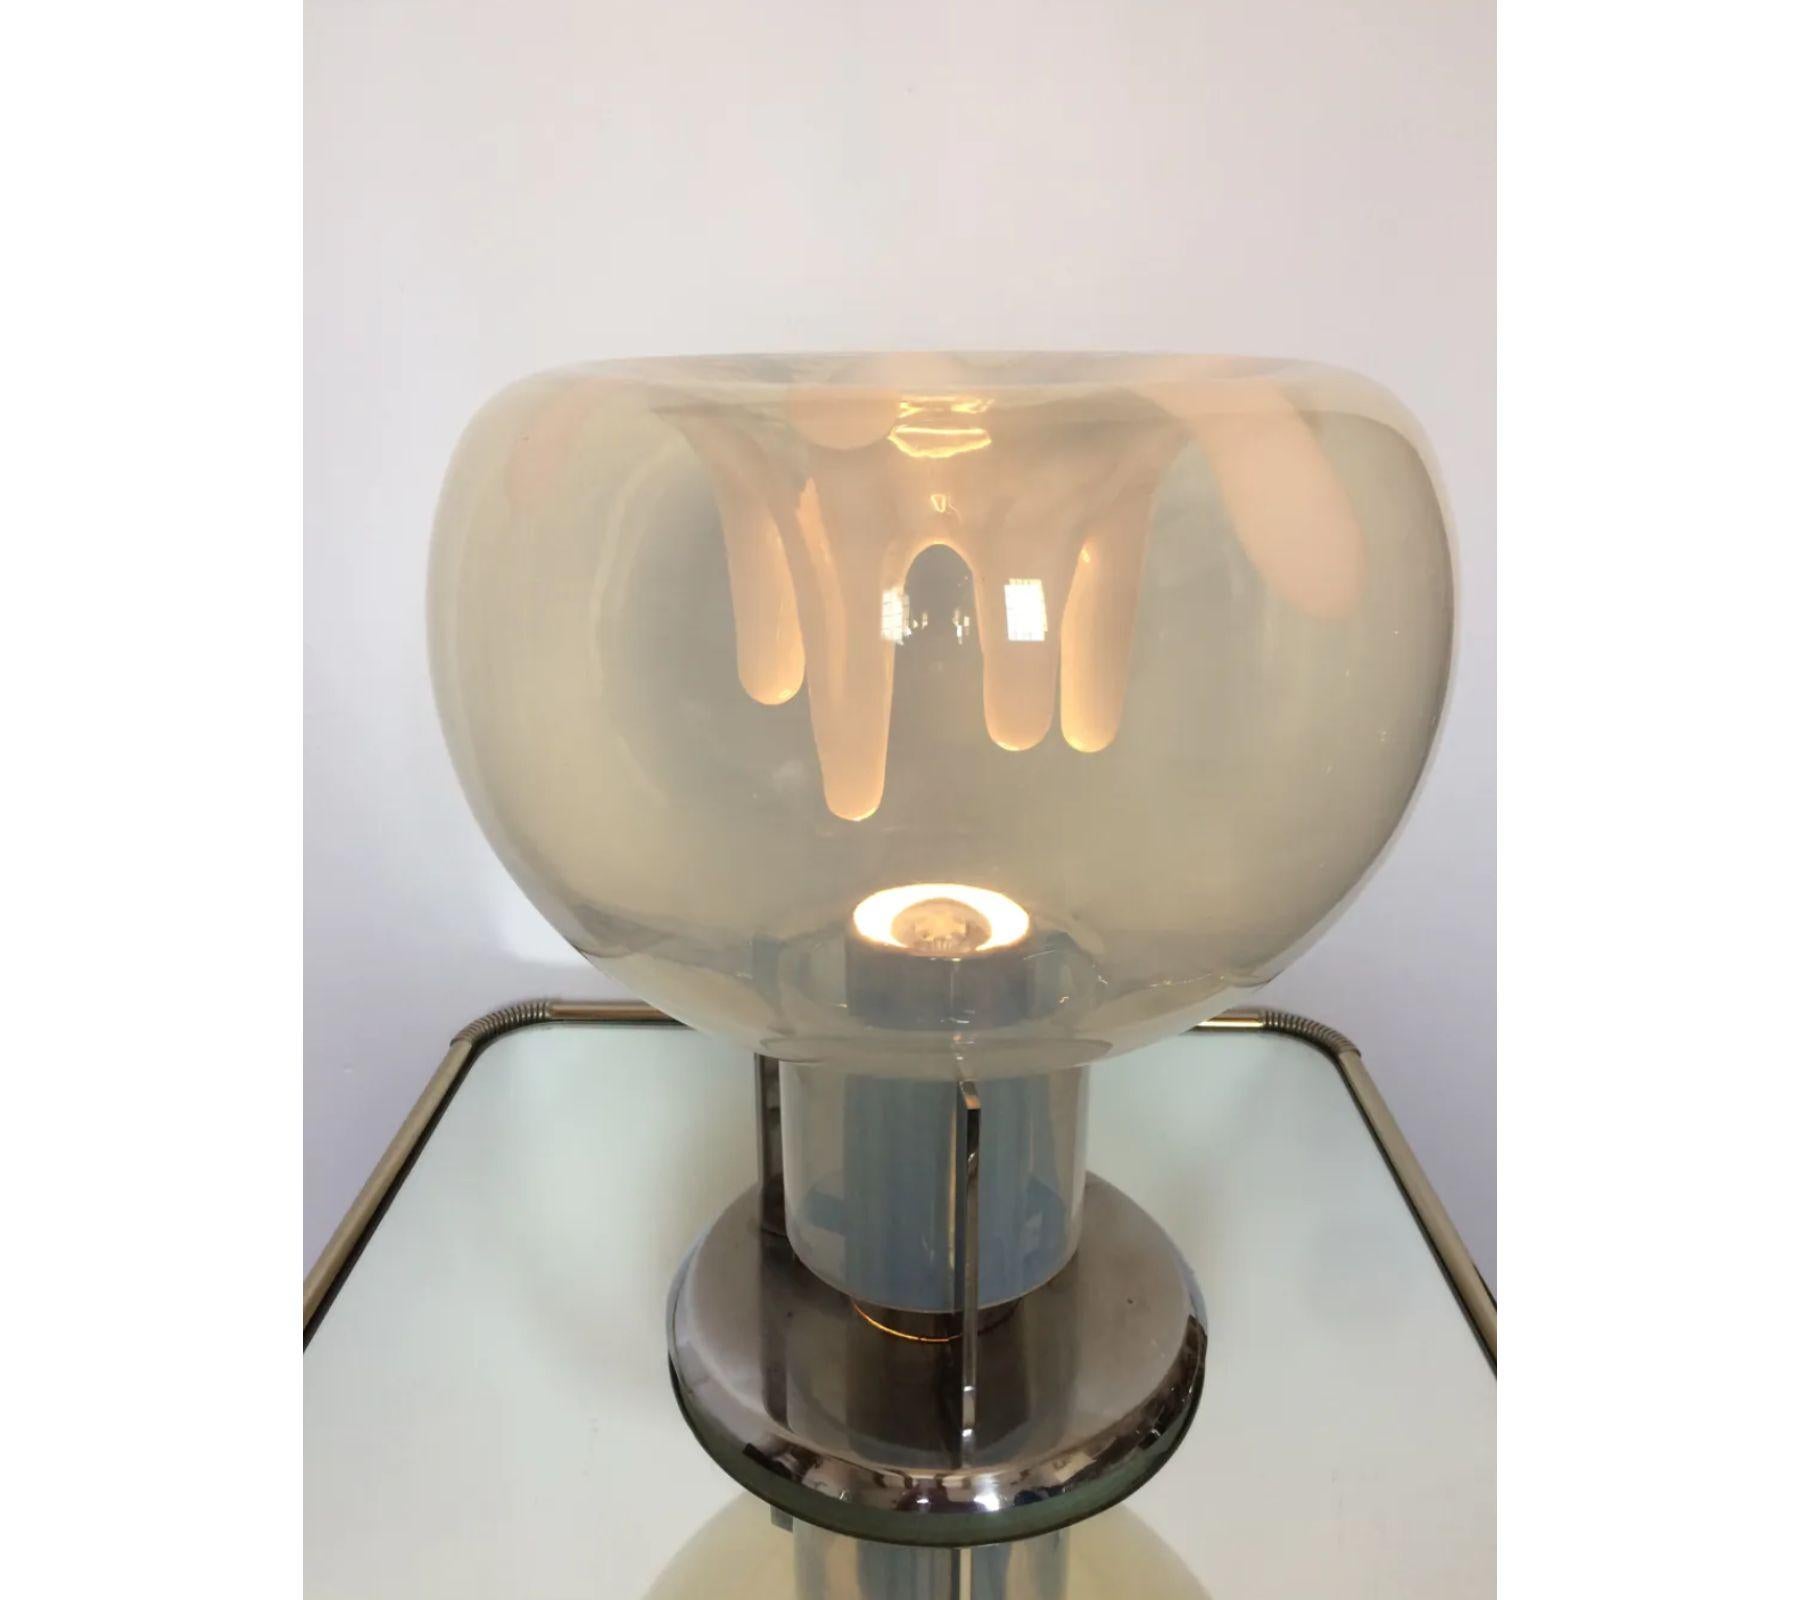 Superb blue lamp, incredible proportions. A design object that will surprise your guests. Rare piece never met at Tempsaux Temps. State of the great globe, brand for use on chrome.
Table lamp: Corded > Type c >250v.